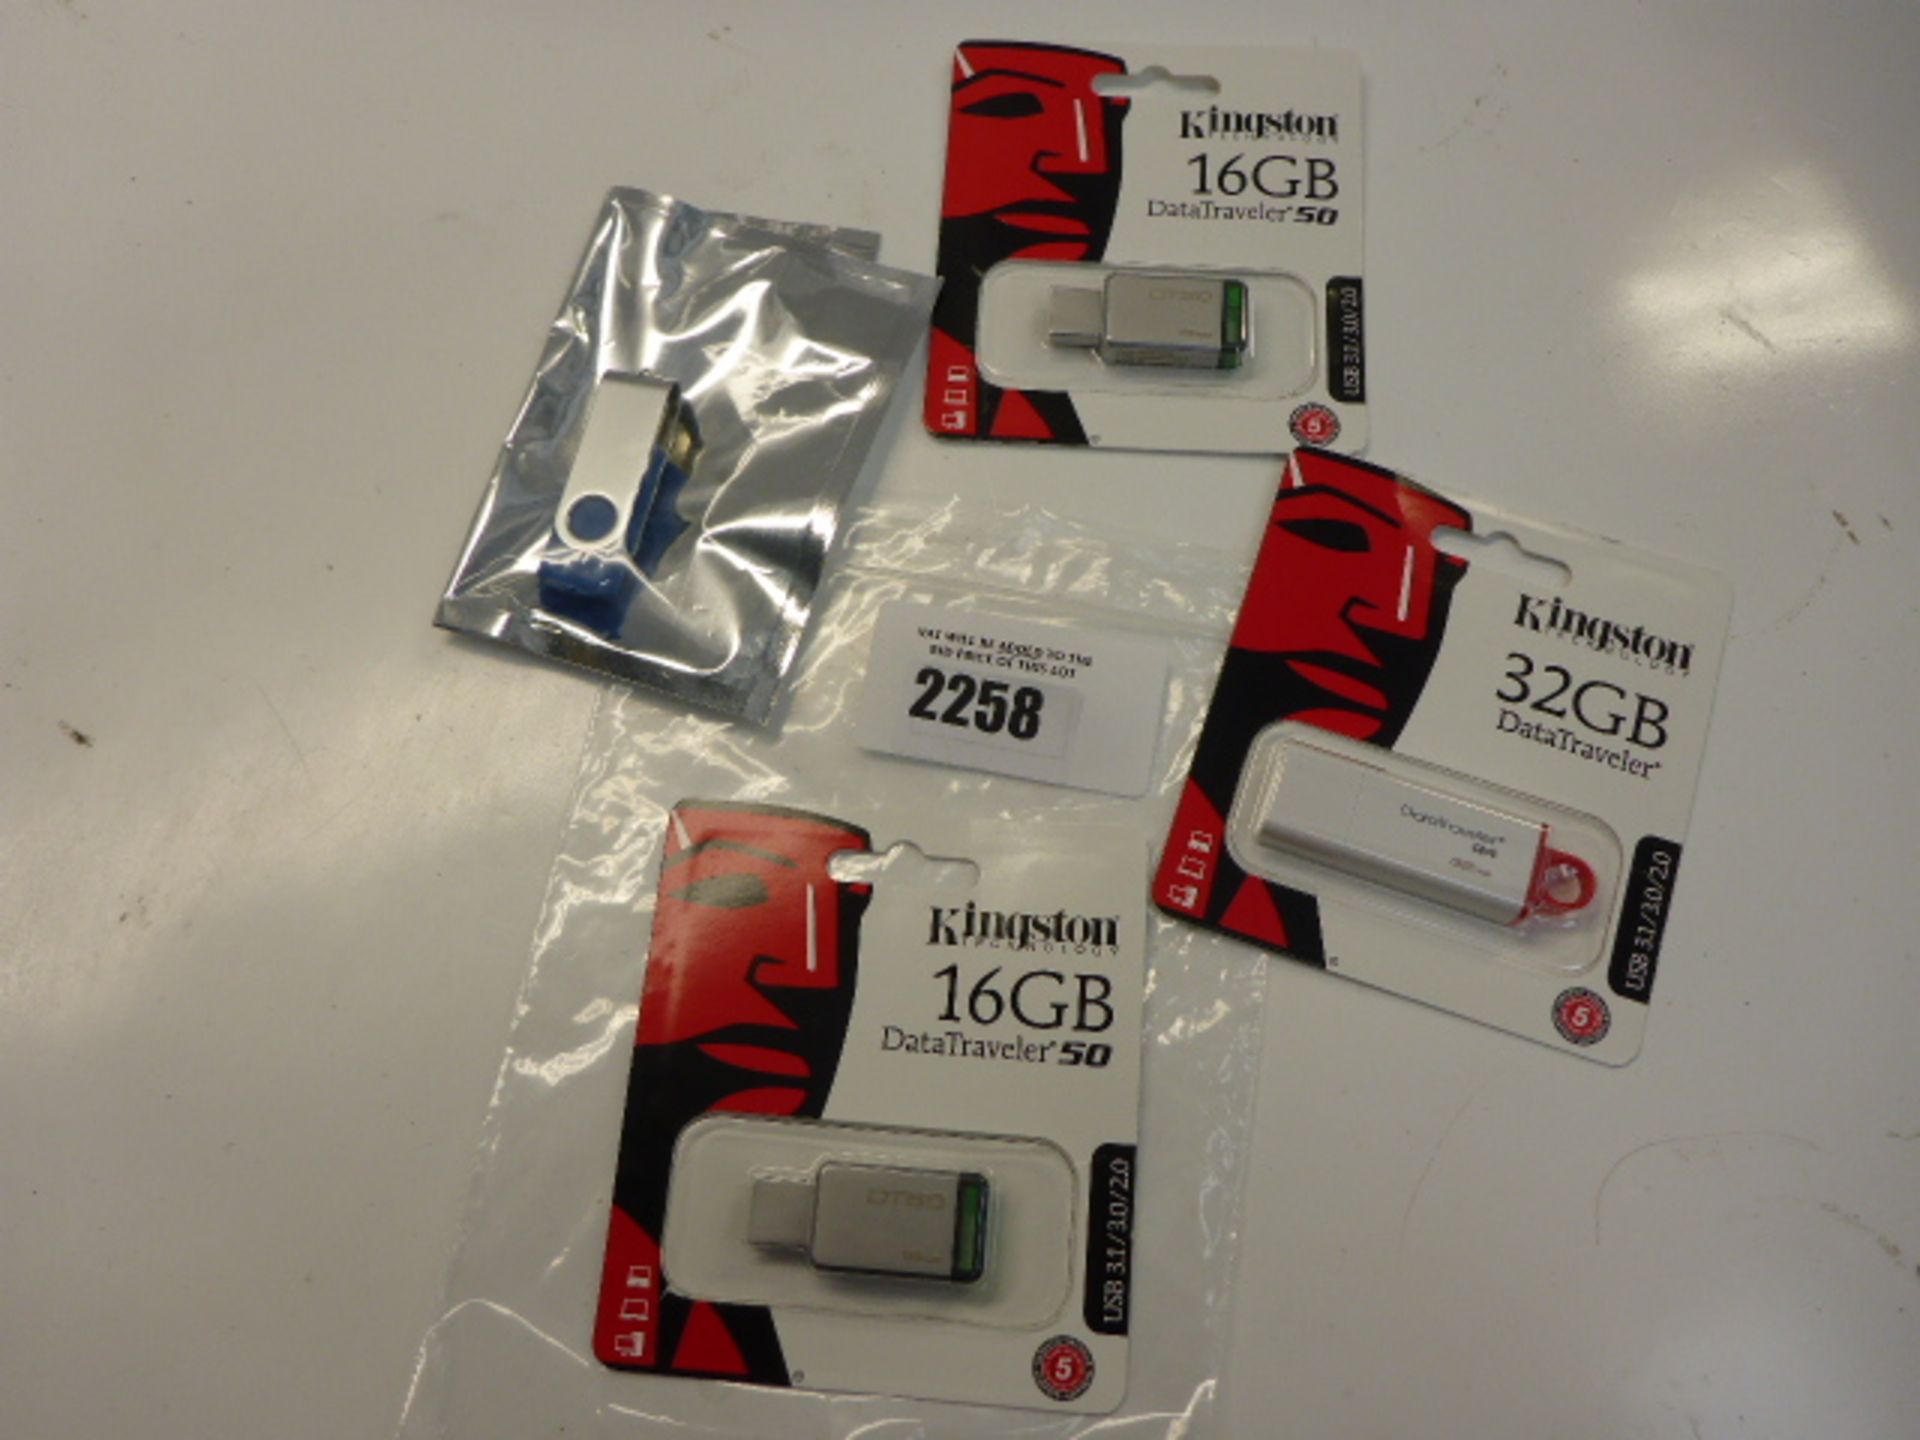 Usb flash storage dives, 16, and 32gb versions.